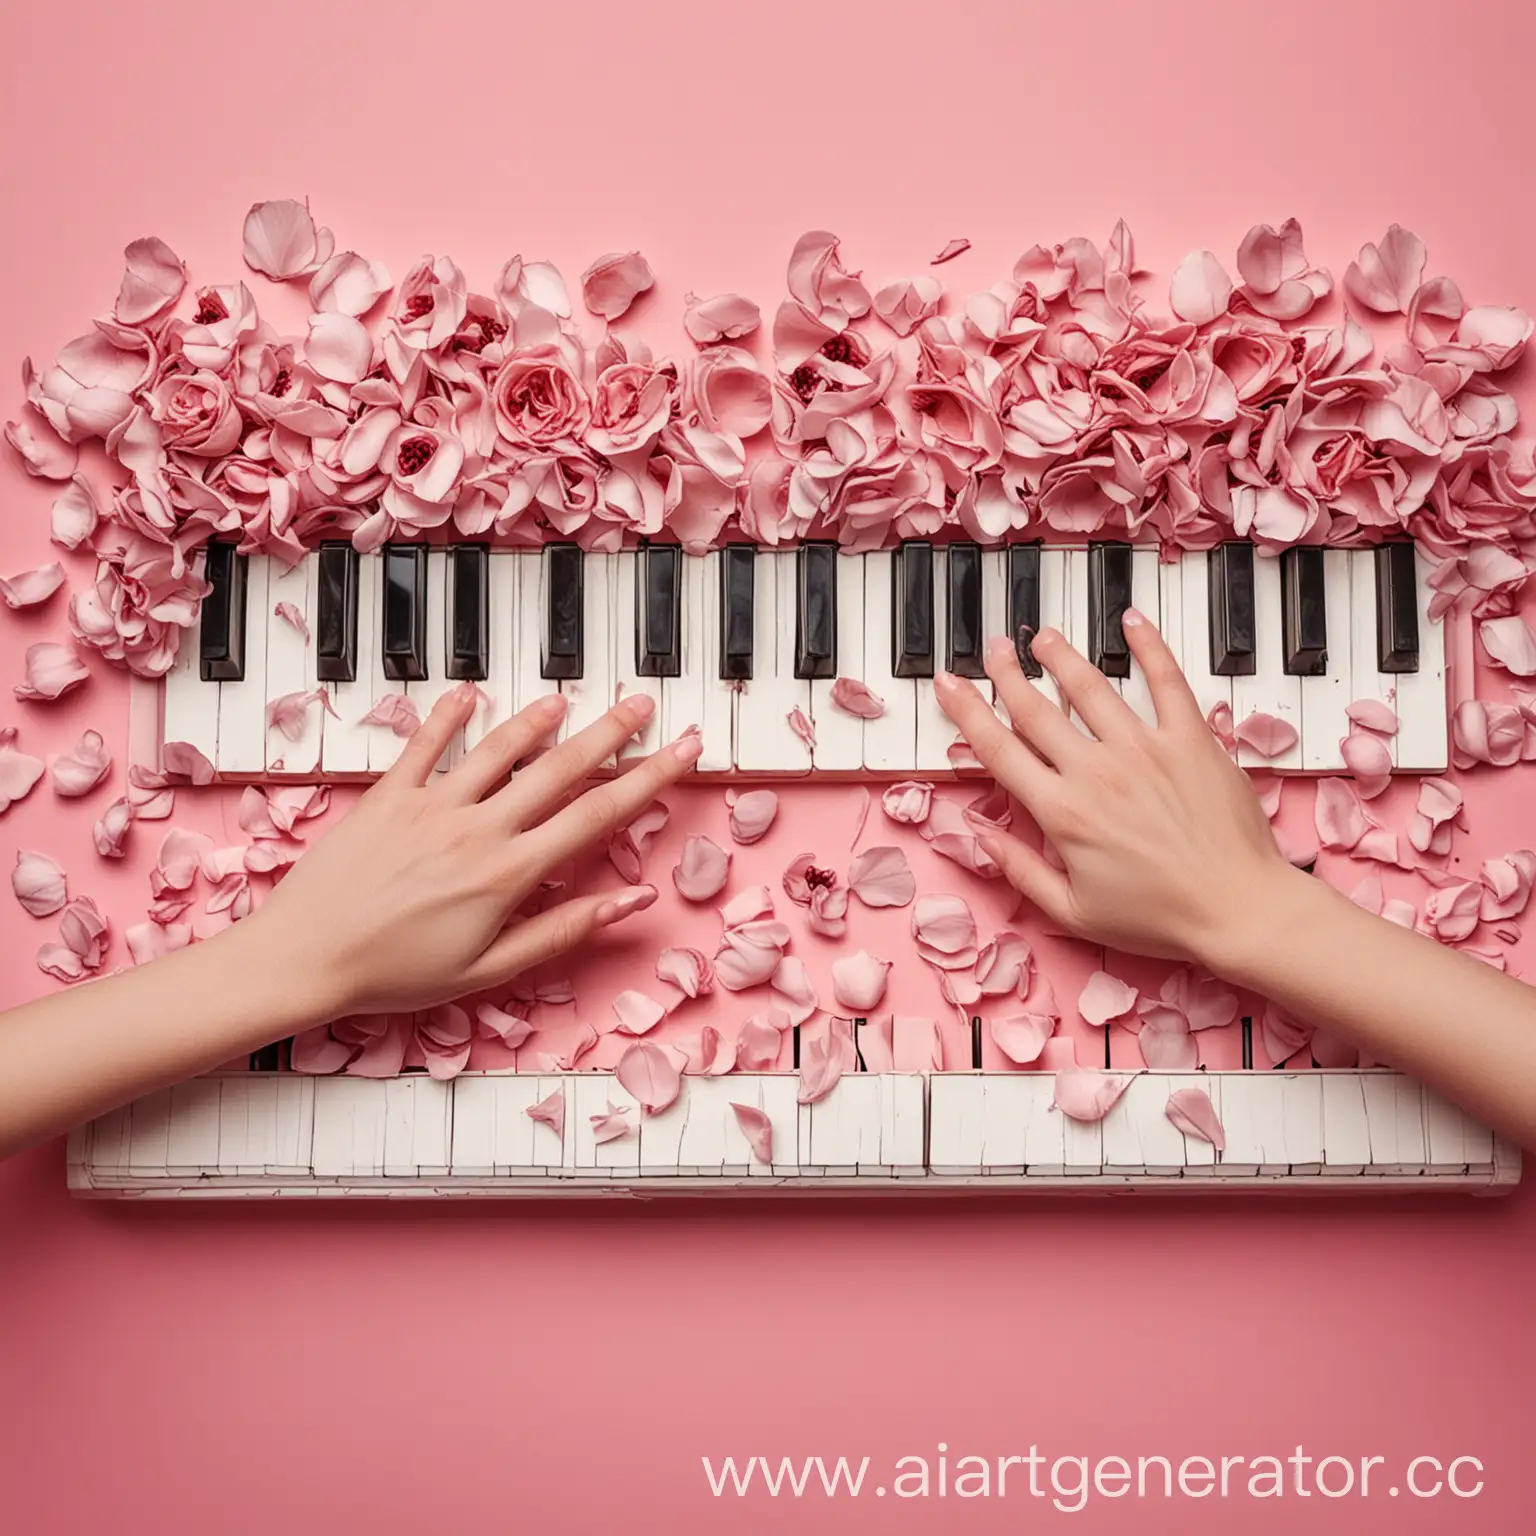 Hands-Playing-Piano-on-Pink-Background-with-Petals